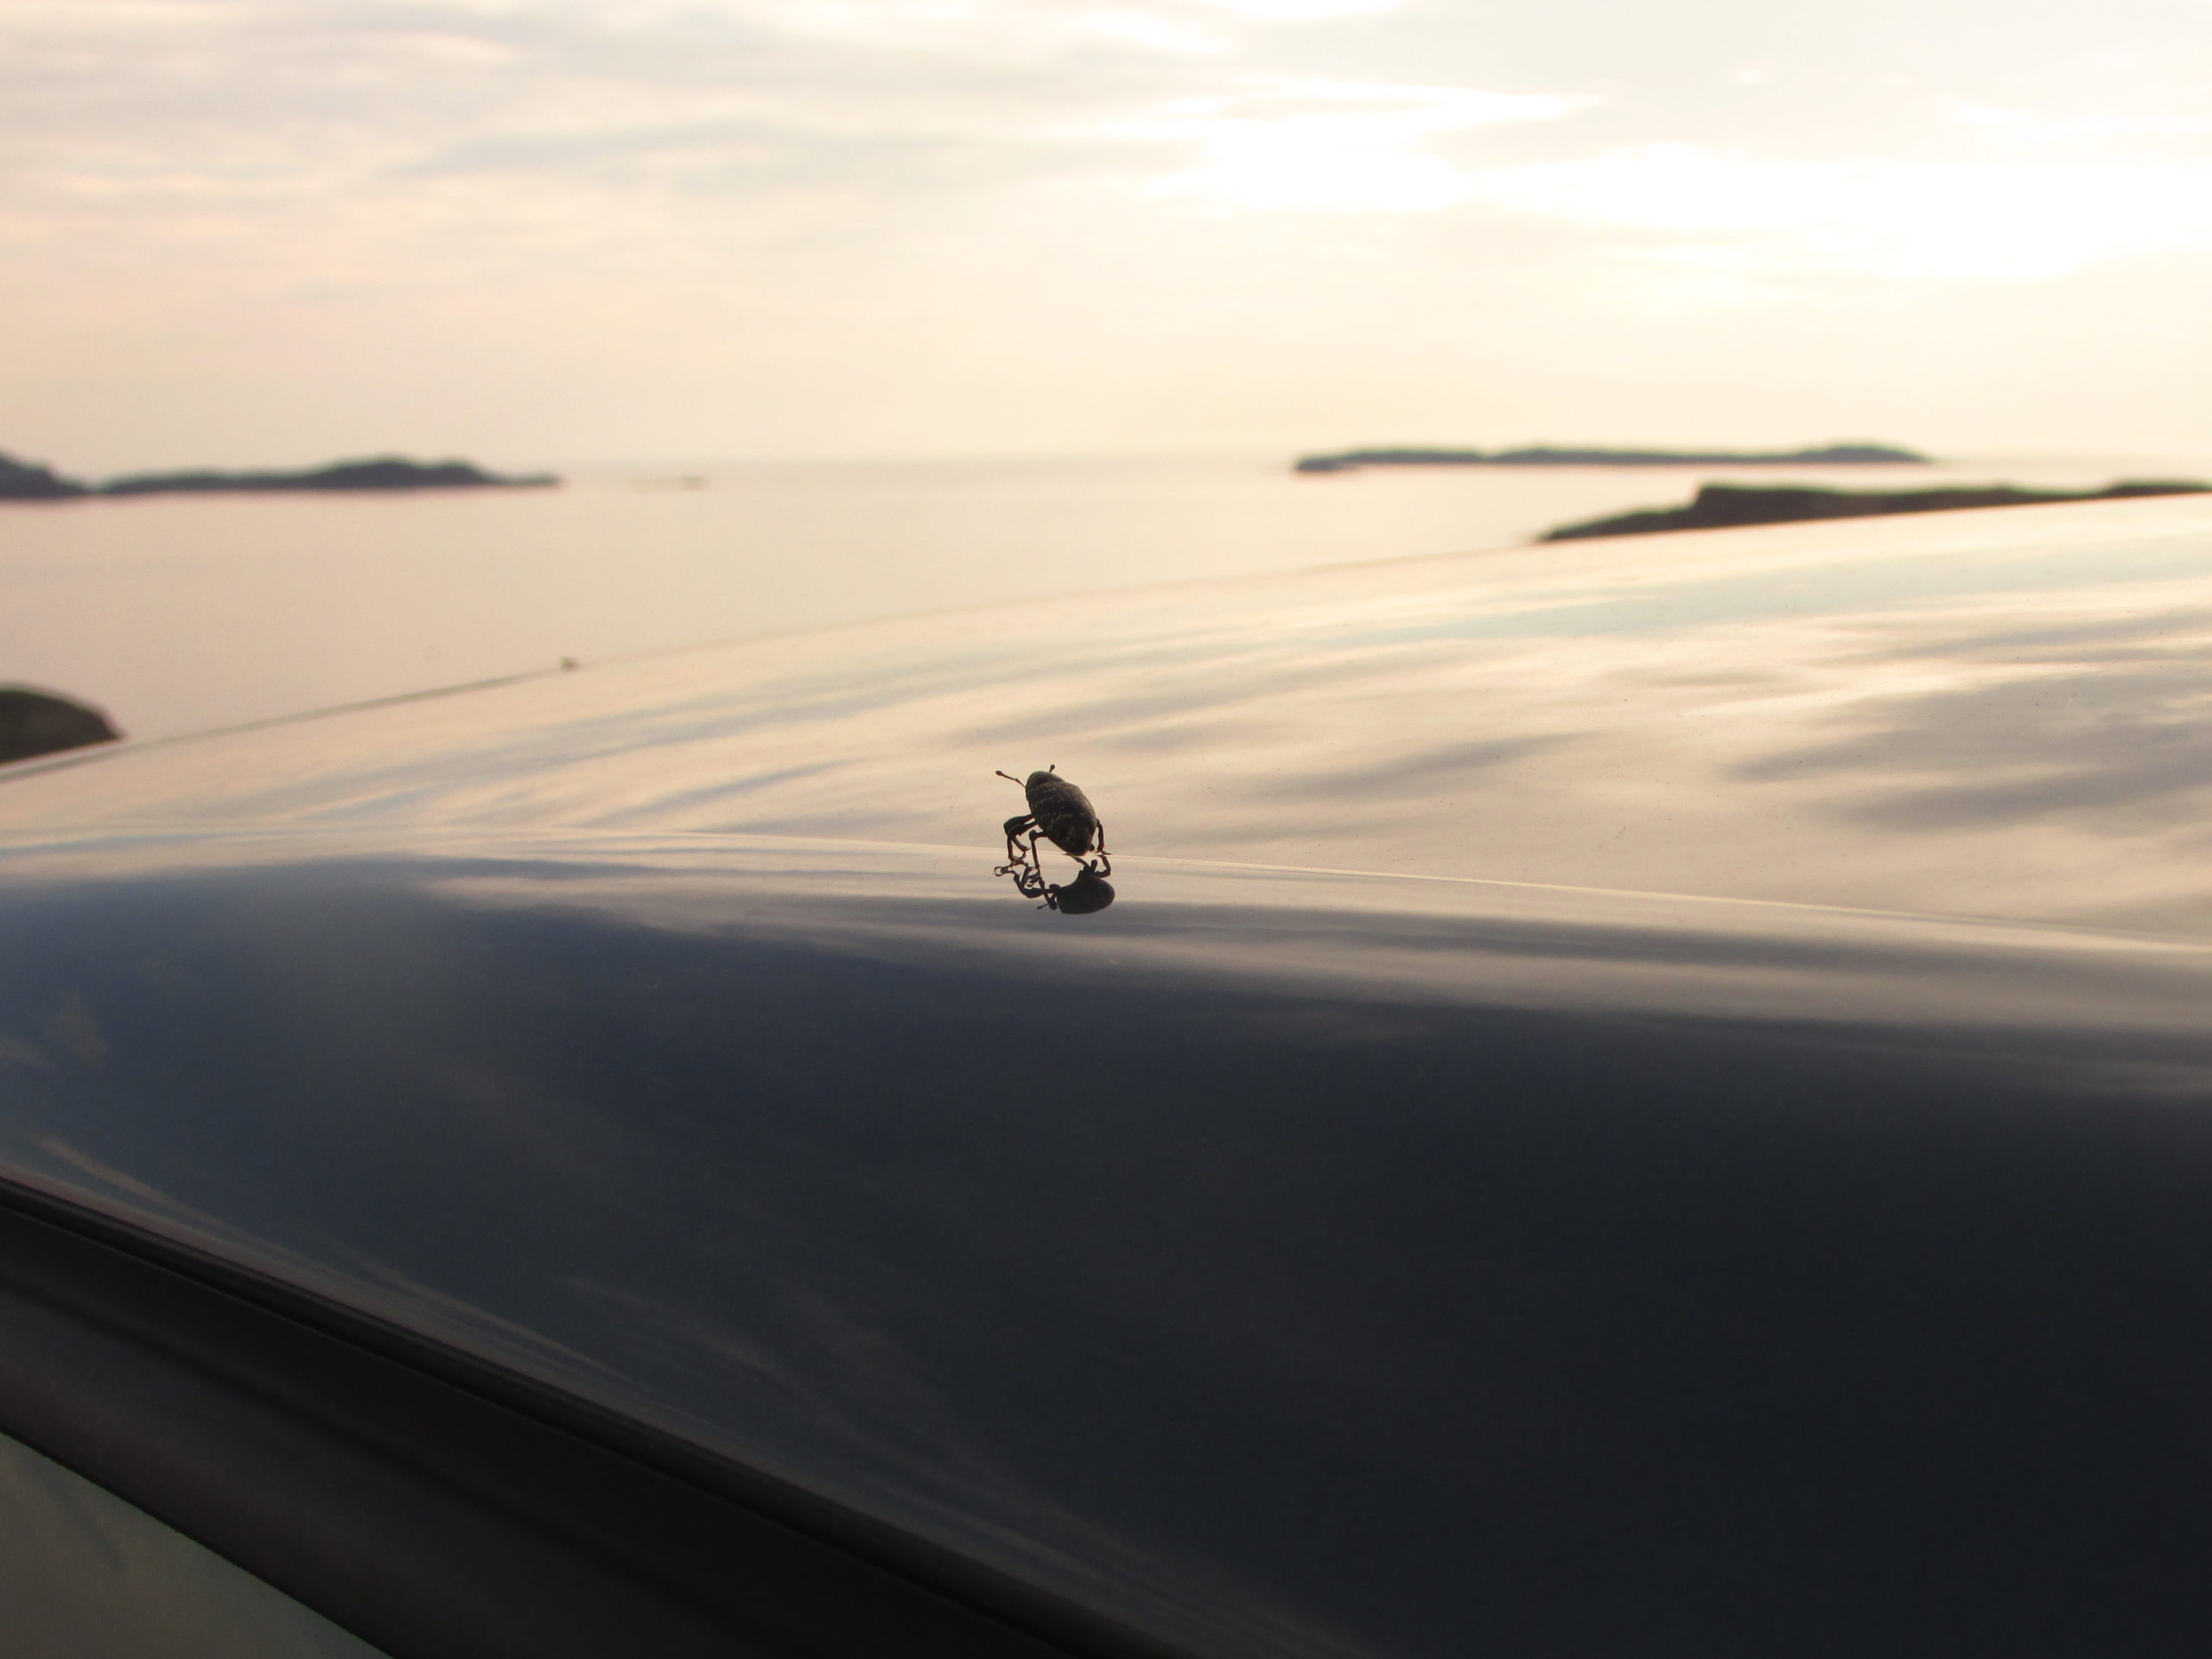 Beetle silhouetted against a shiny surface